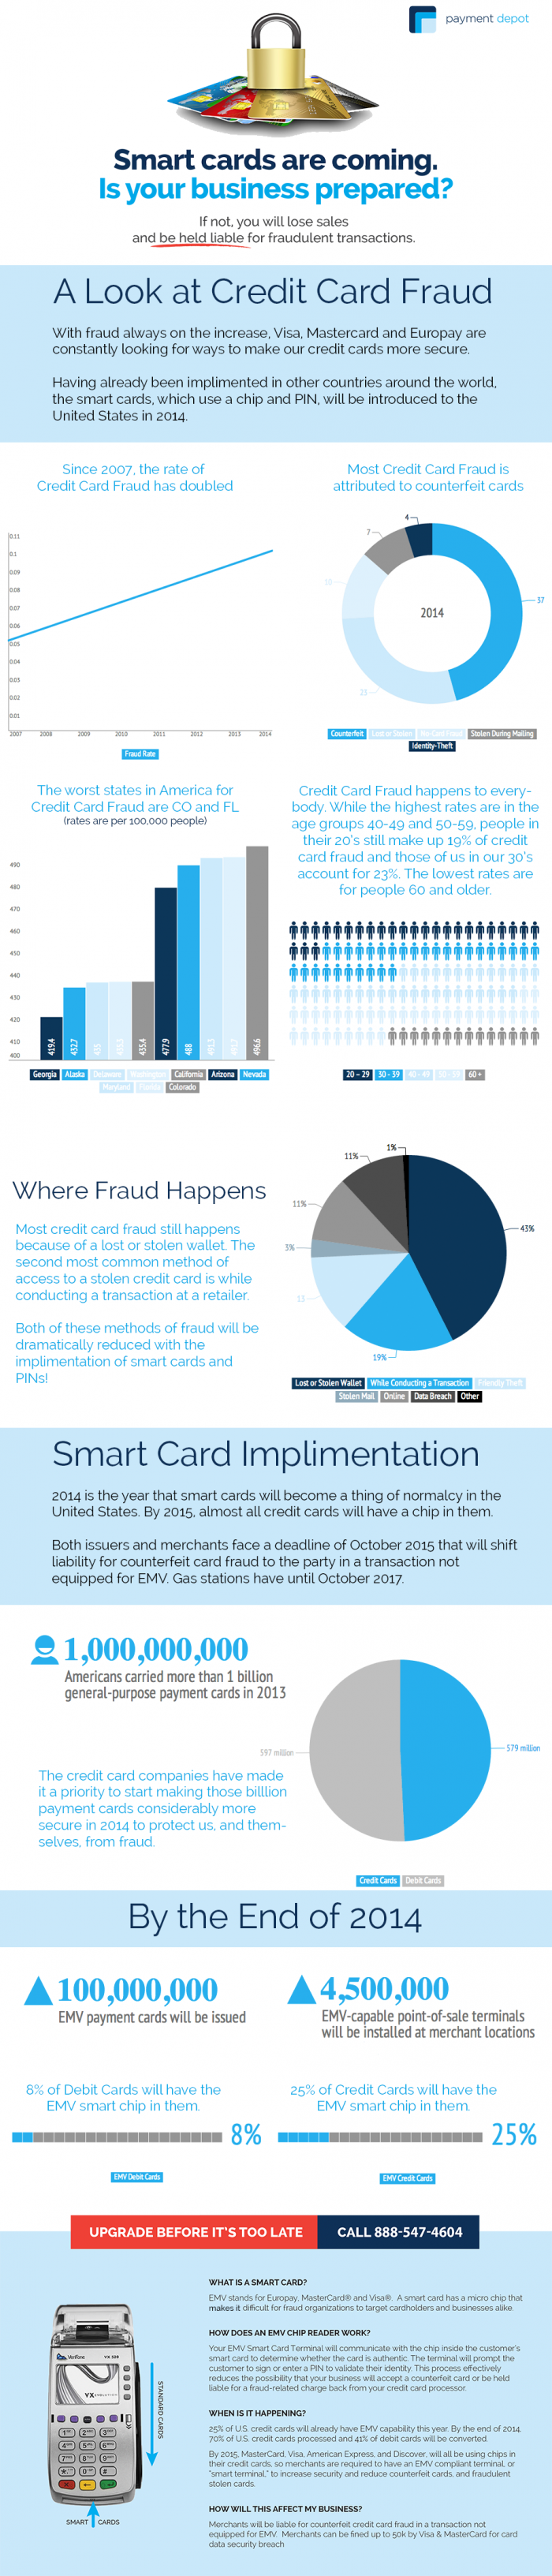 Is Your Business Prepared for Smart Credit Cards?